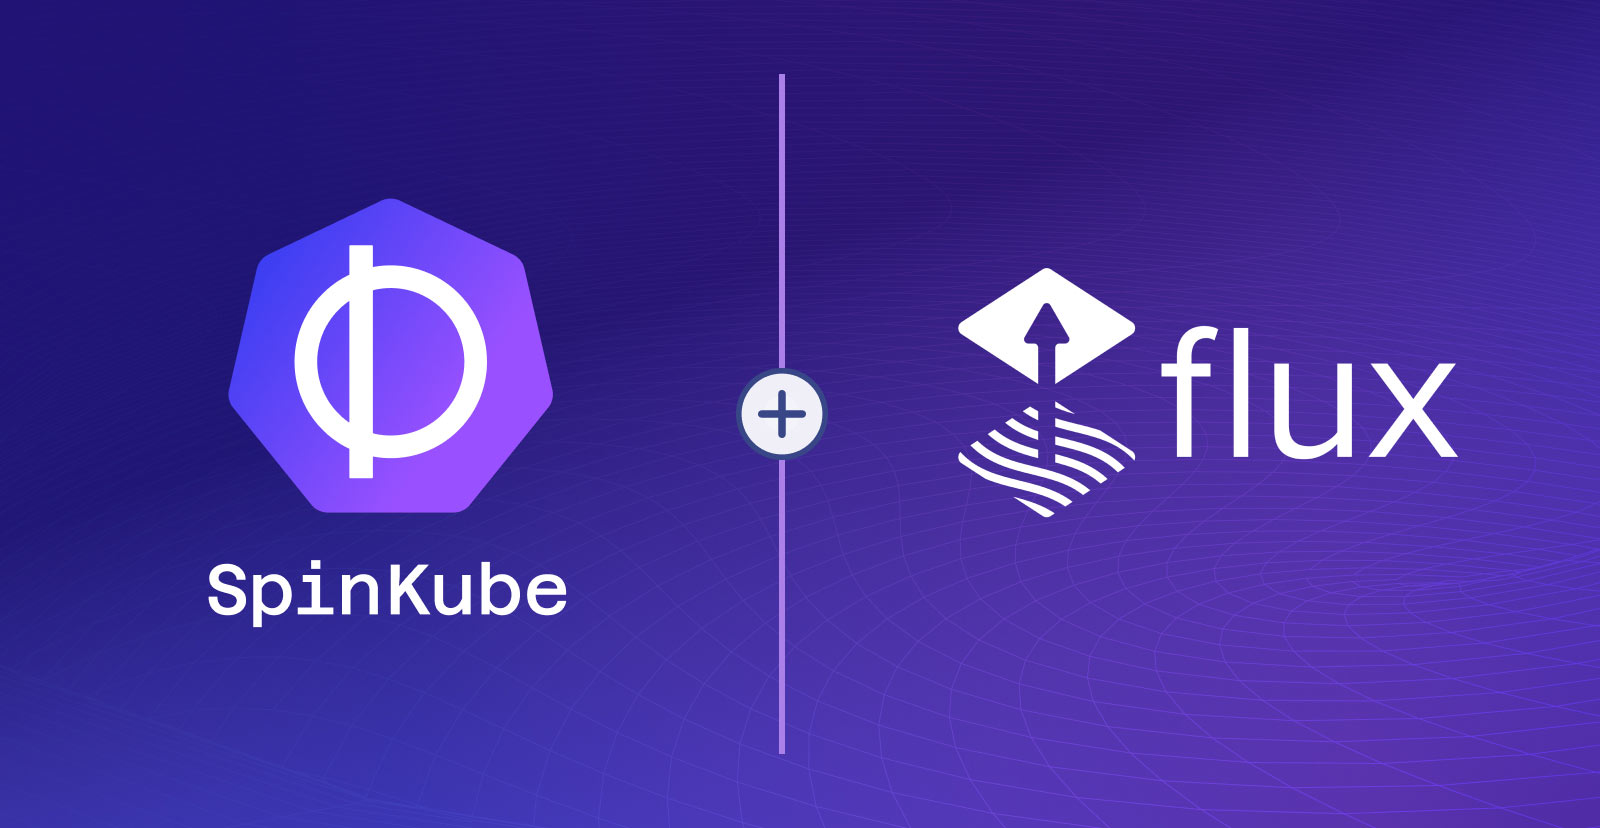 SpinKube and Flux automated, on Kubernetes 1.30